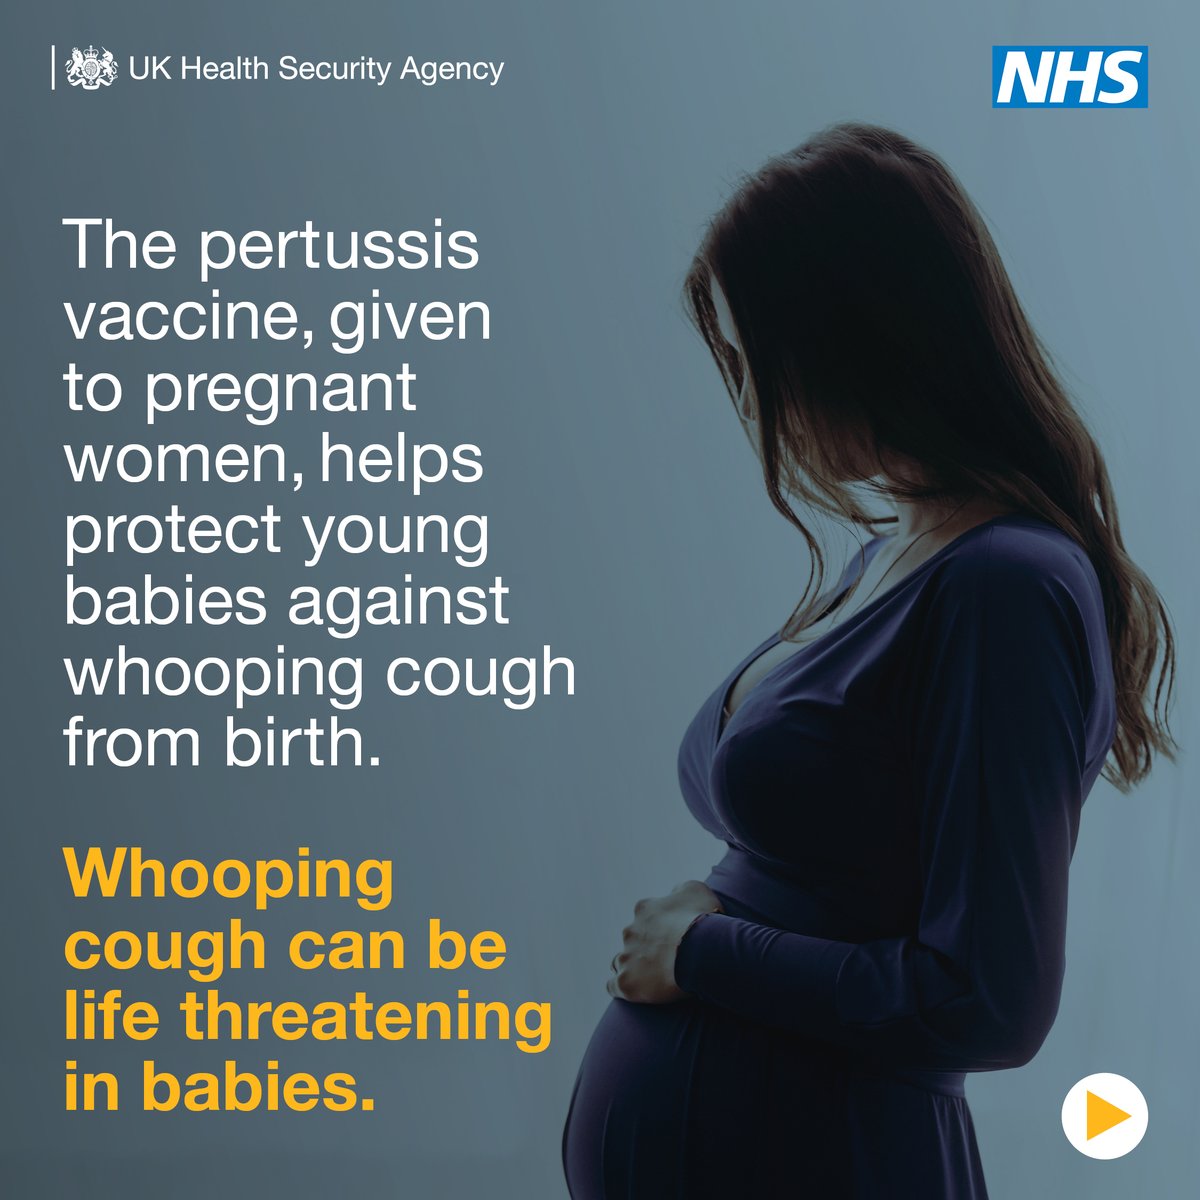 If you're pregnant, it's important to take up the #Pertussis vaccine when offered. It helps to protect your baby in their first few weeks of life, as #WhoopingCough can be life-threatening. More info: nhs.uk/pregnancy/keep…